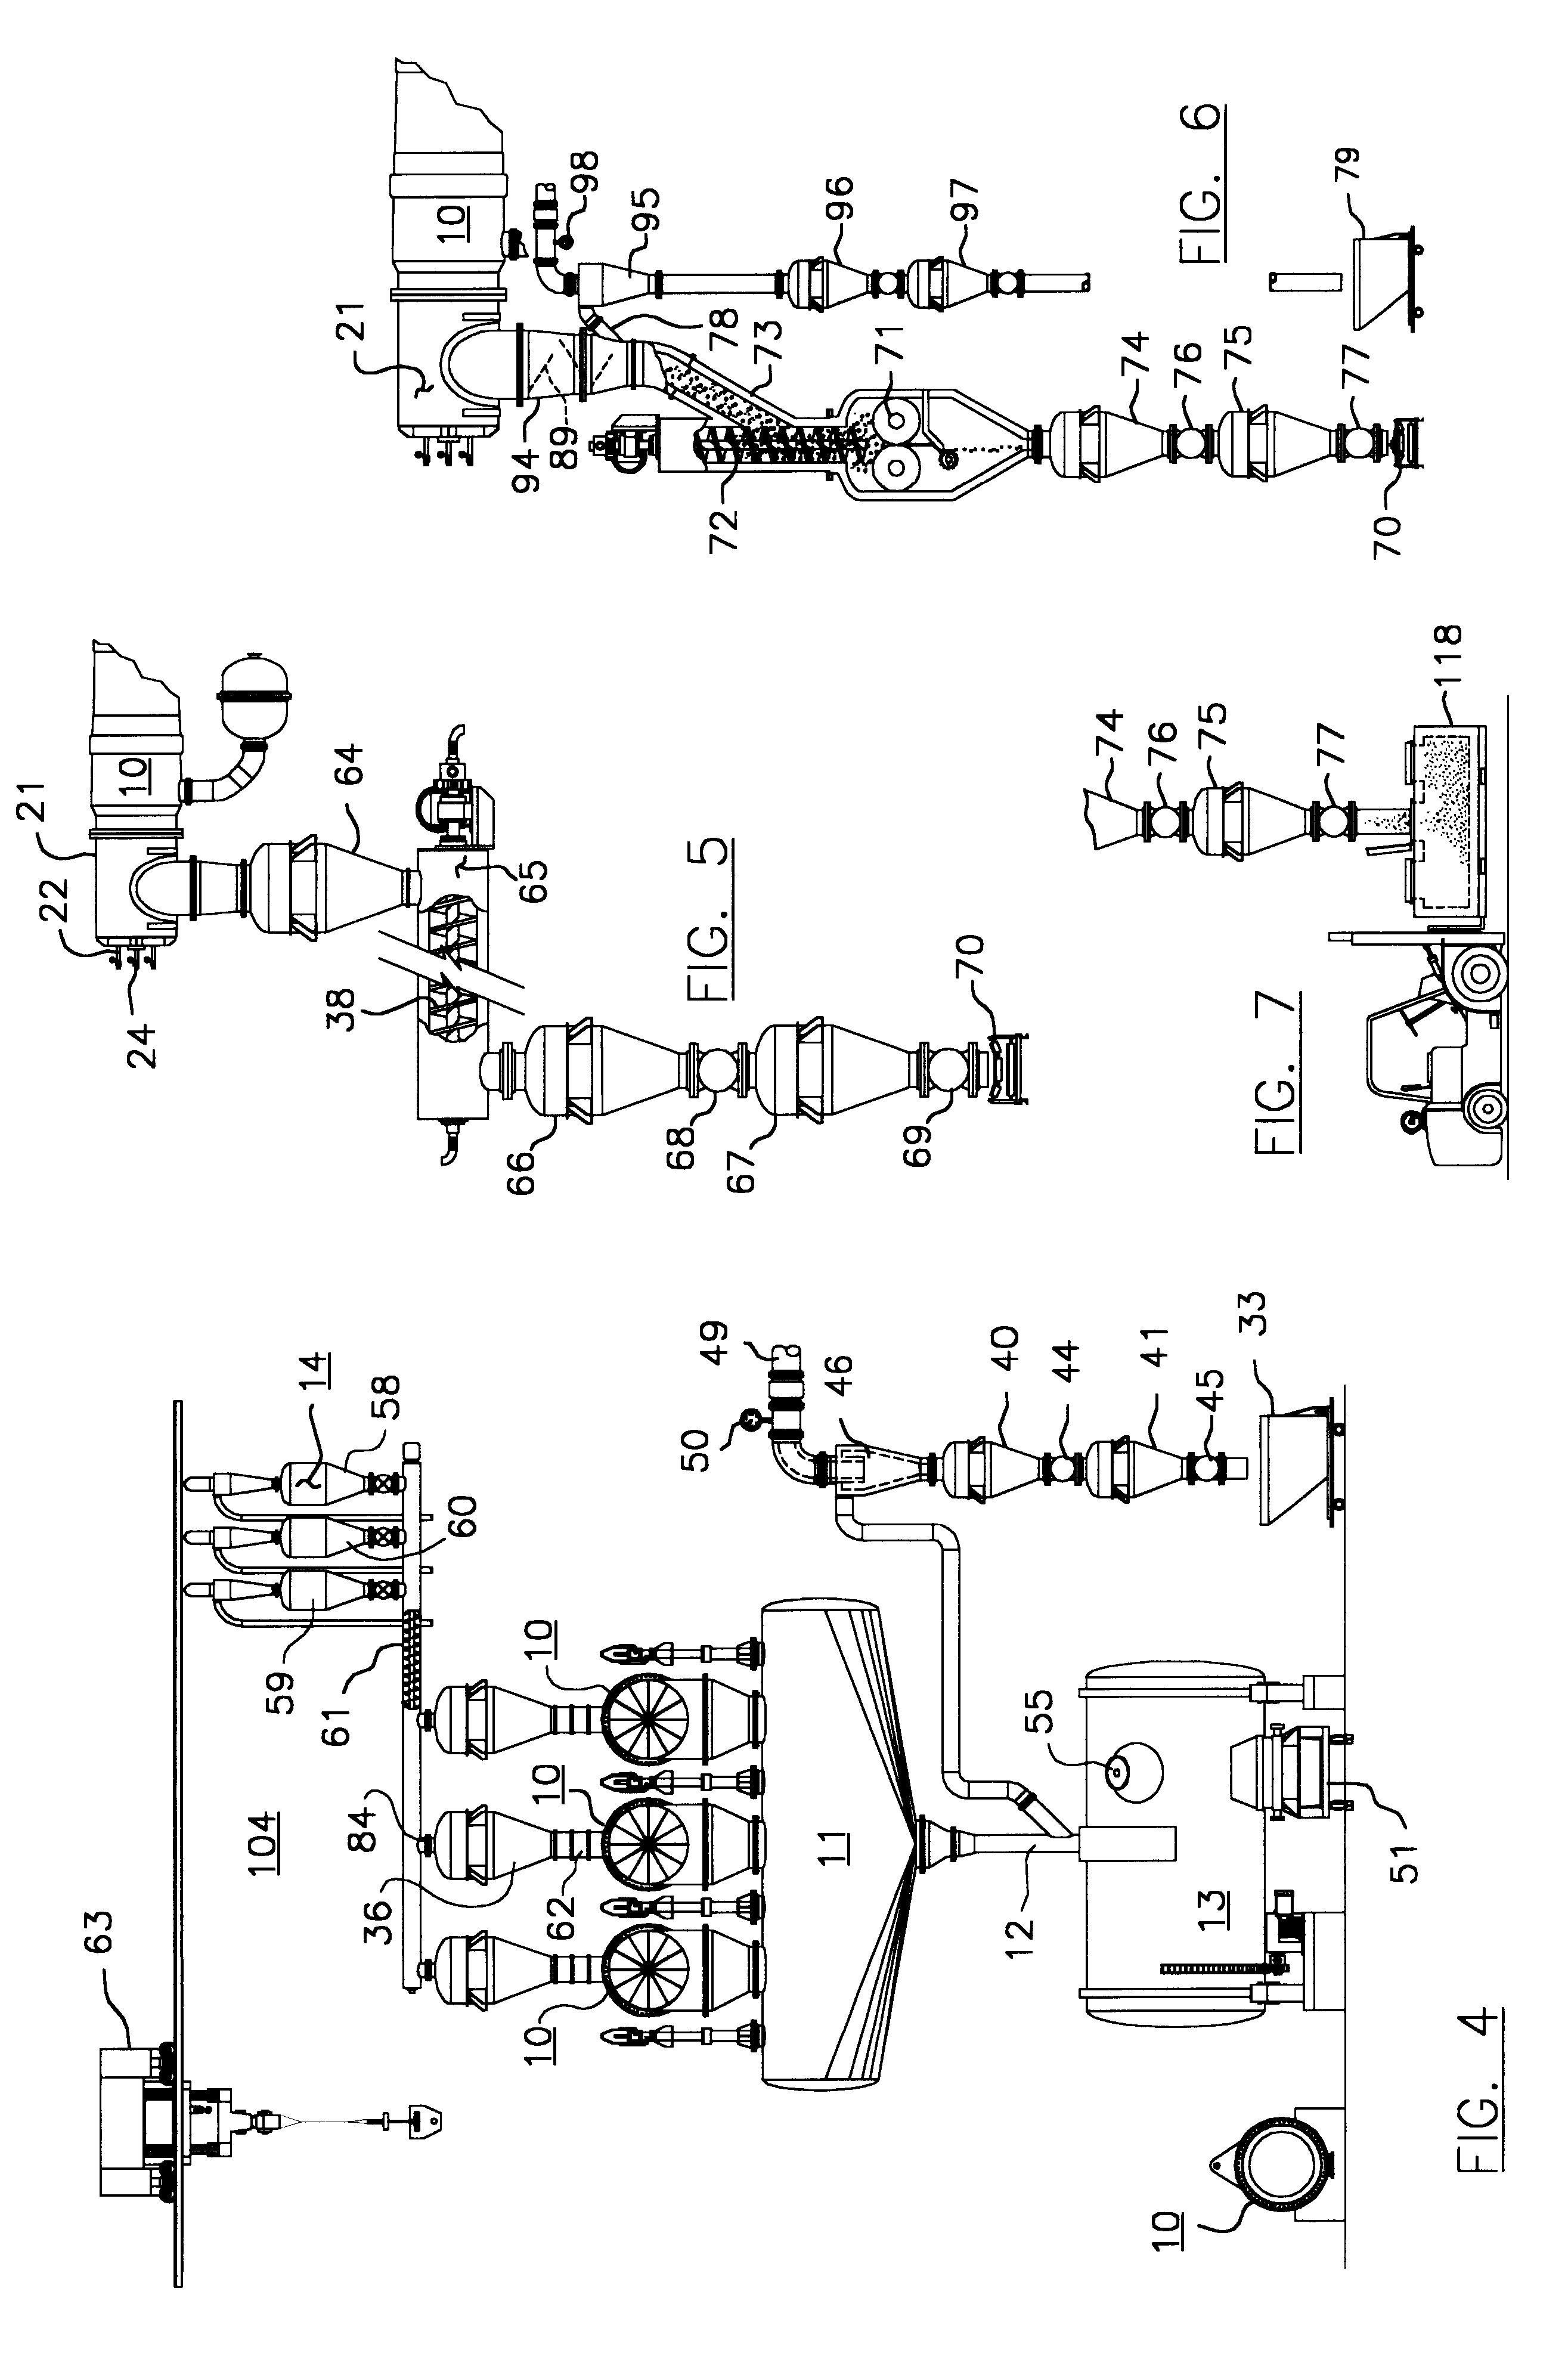 Method and apparatus for practicing carbonaceous-based metallurgy